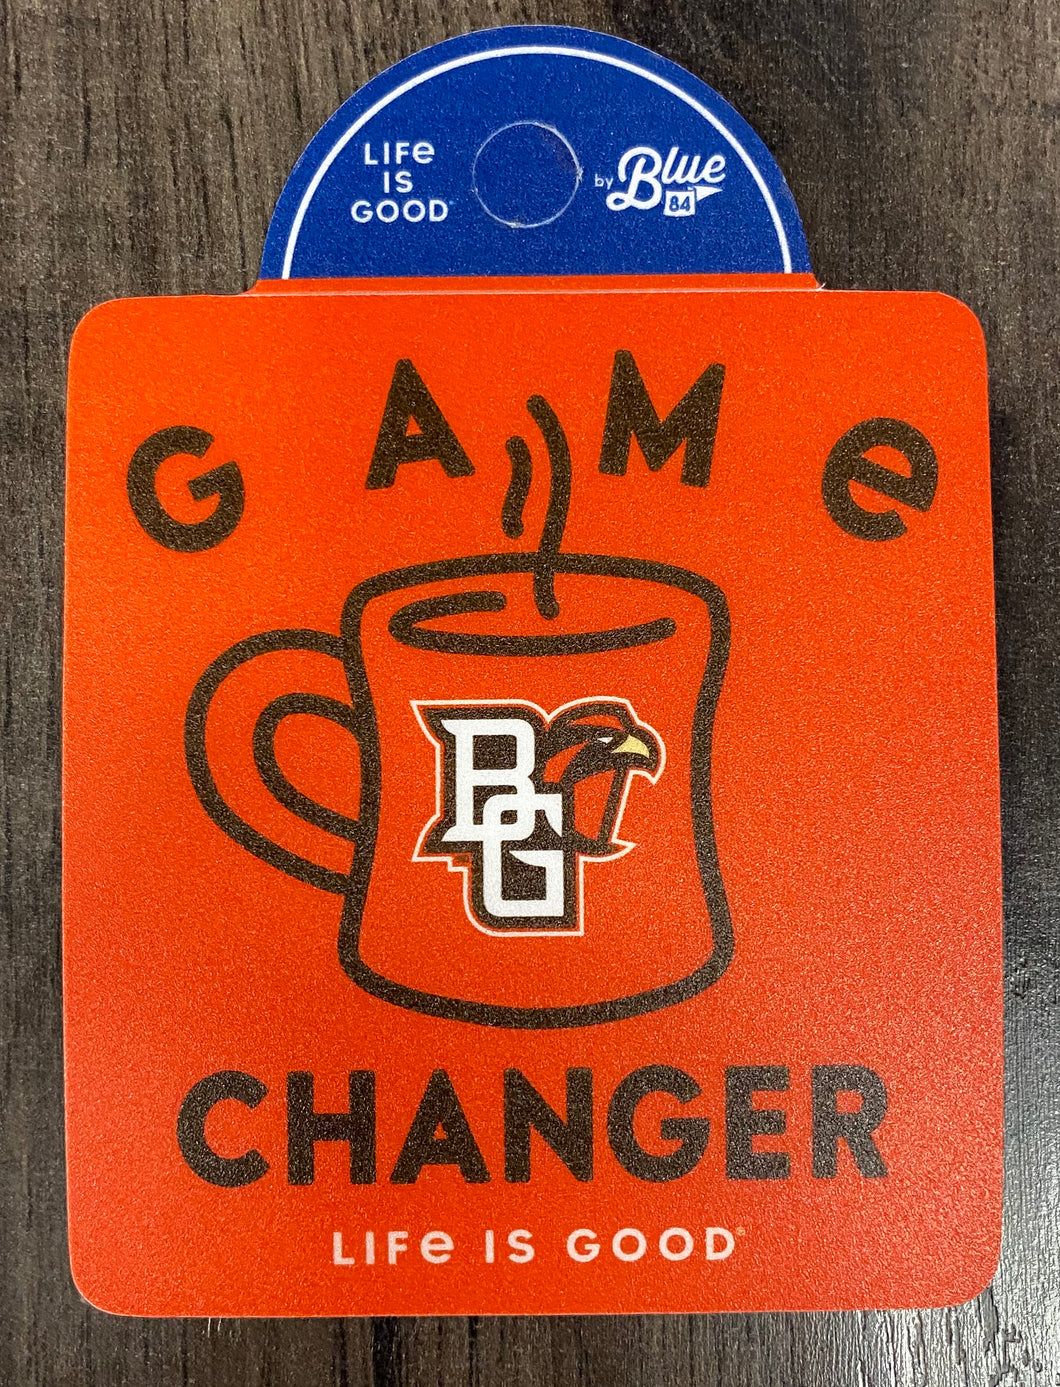 Blue 84 Life is Good Game Changer Sticker